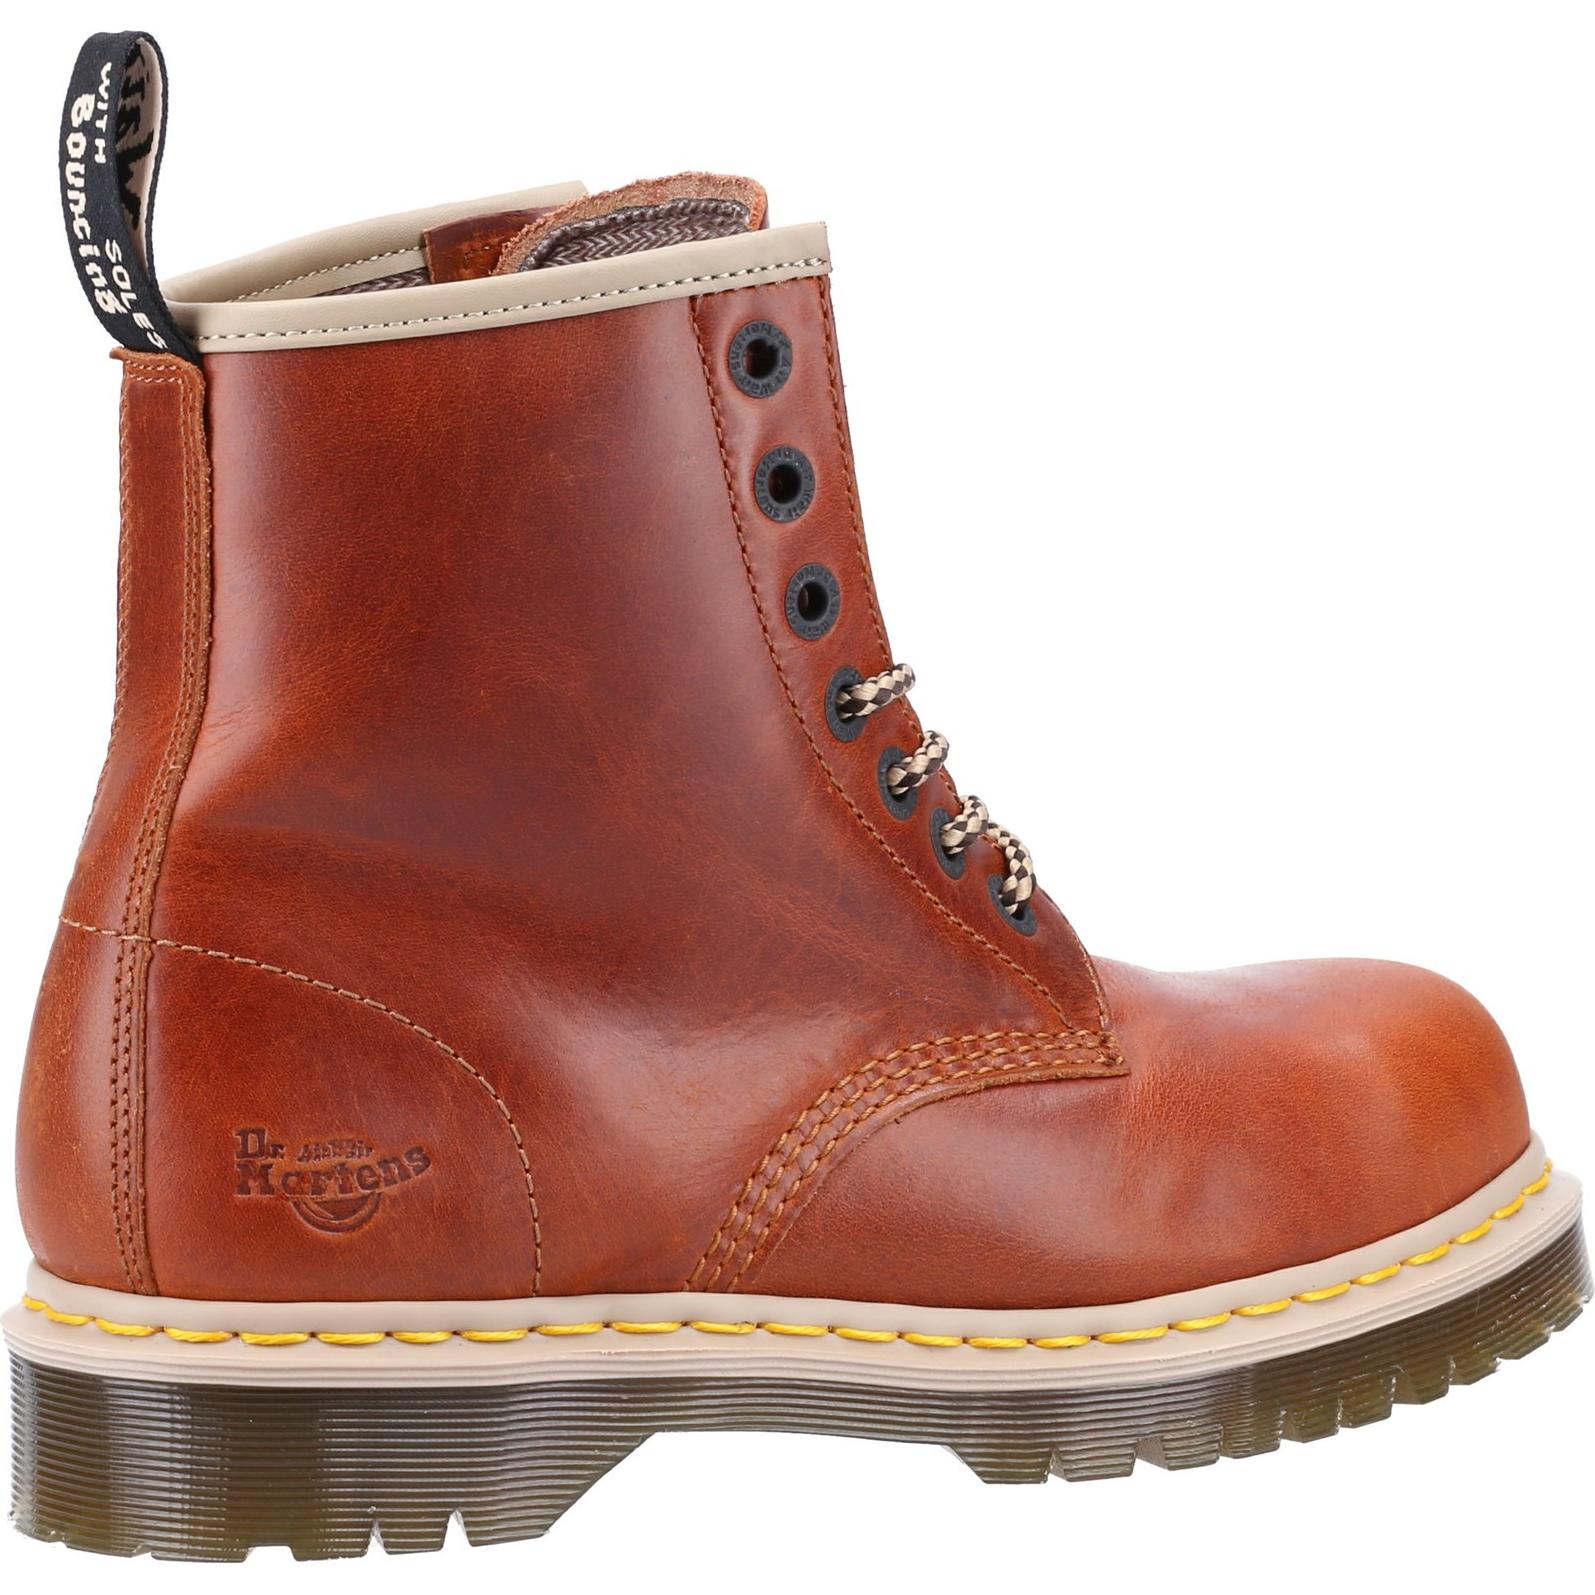 Dr. Martens Icon 7B10 Safety Boot